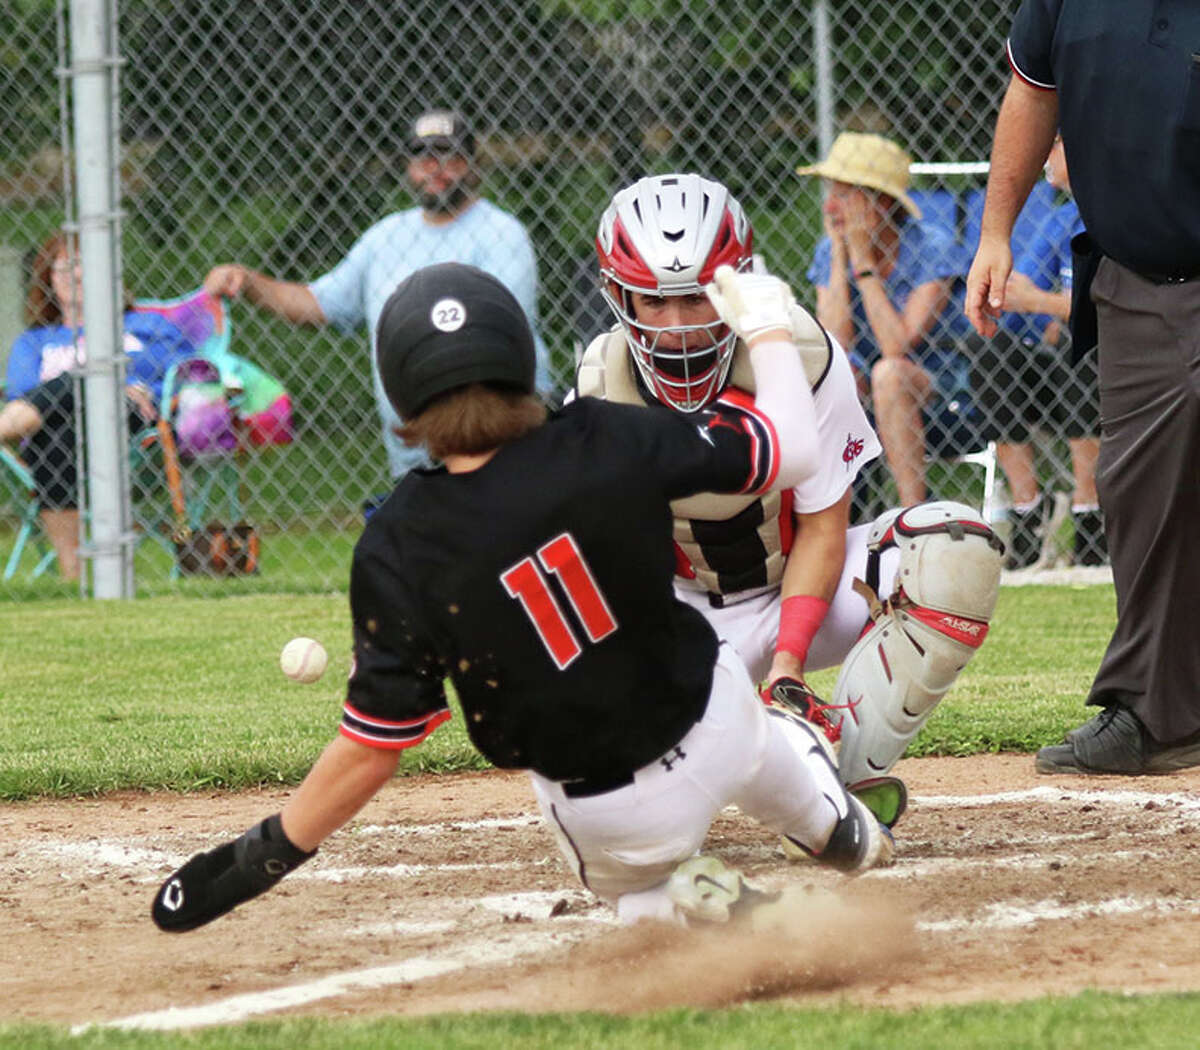 Carlinville catcher Carson Wiser is unable to secure the throw while Bryce Buhs (11) slides in to score a run Thursday in a Class 2A regional semifinal in Gillespie.